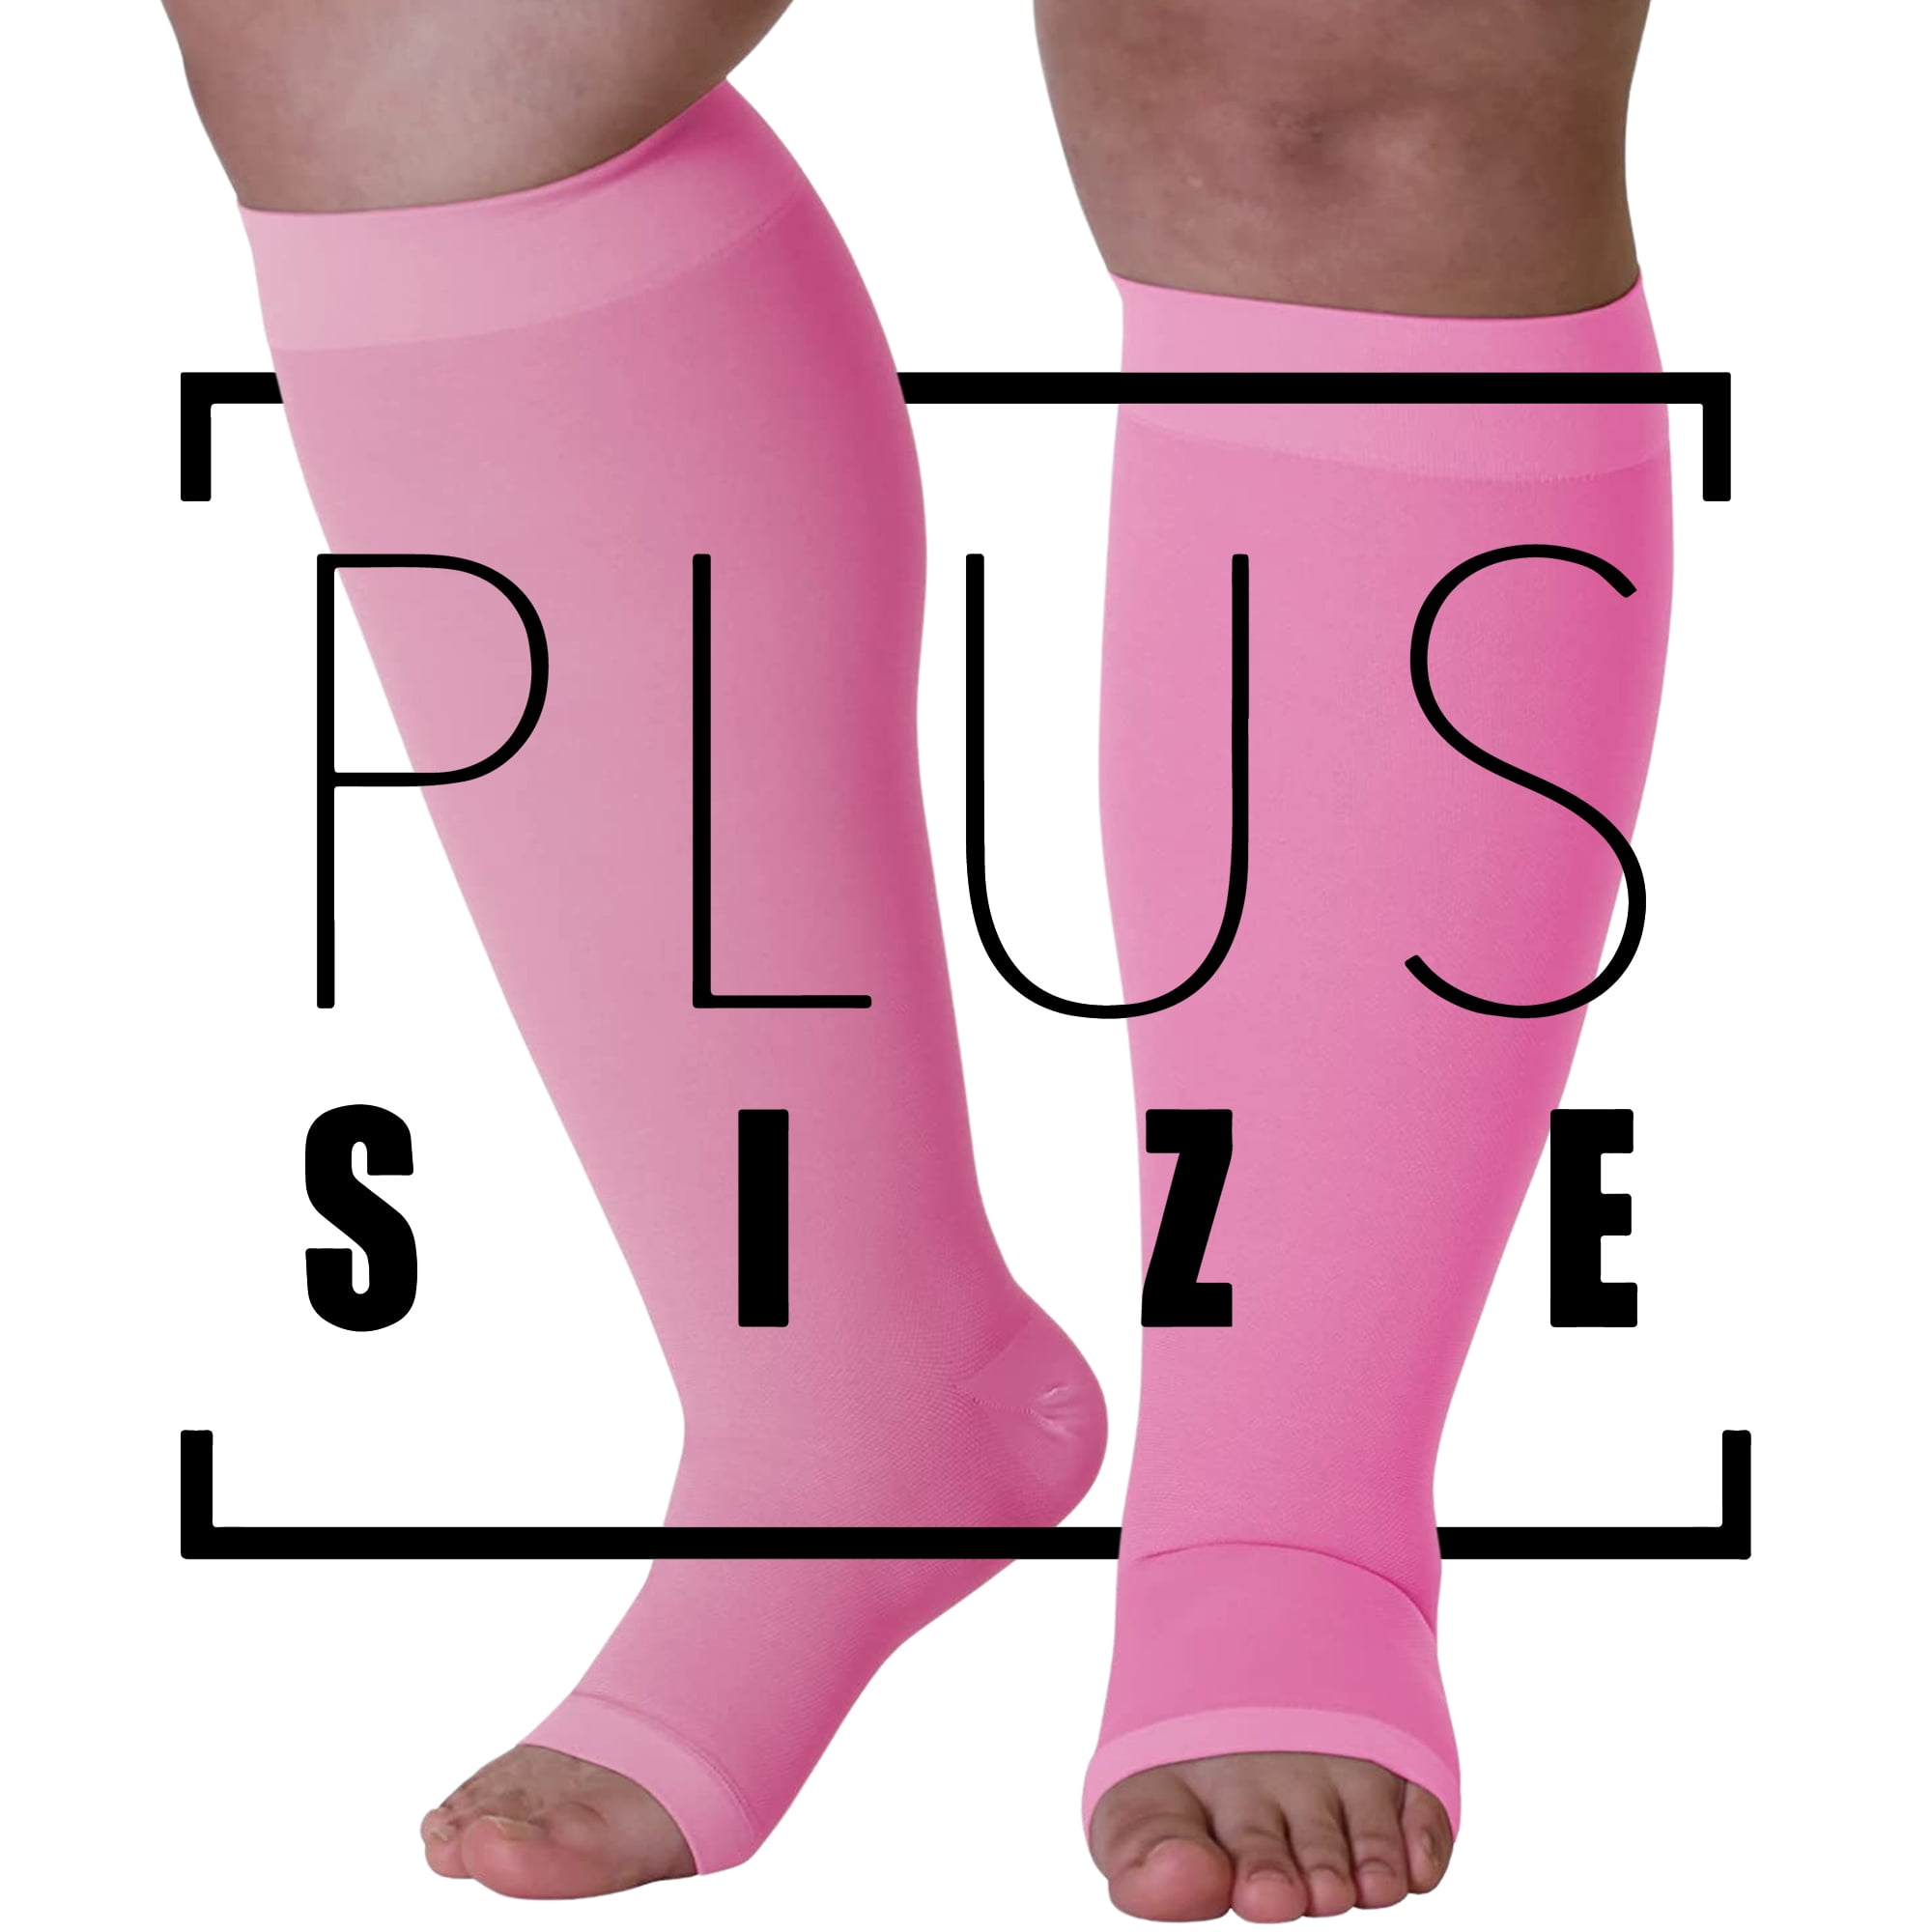 6XL Plus Size Unisex Compression Knee High Stockings 20-30mmHg - Wide ...